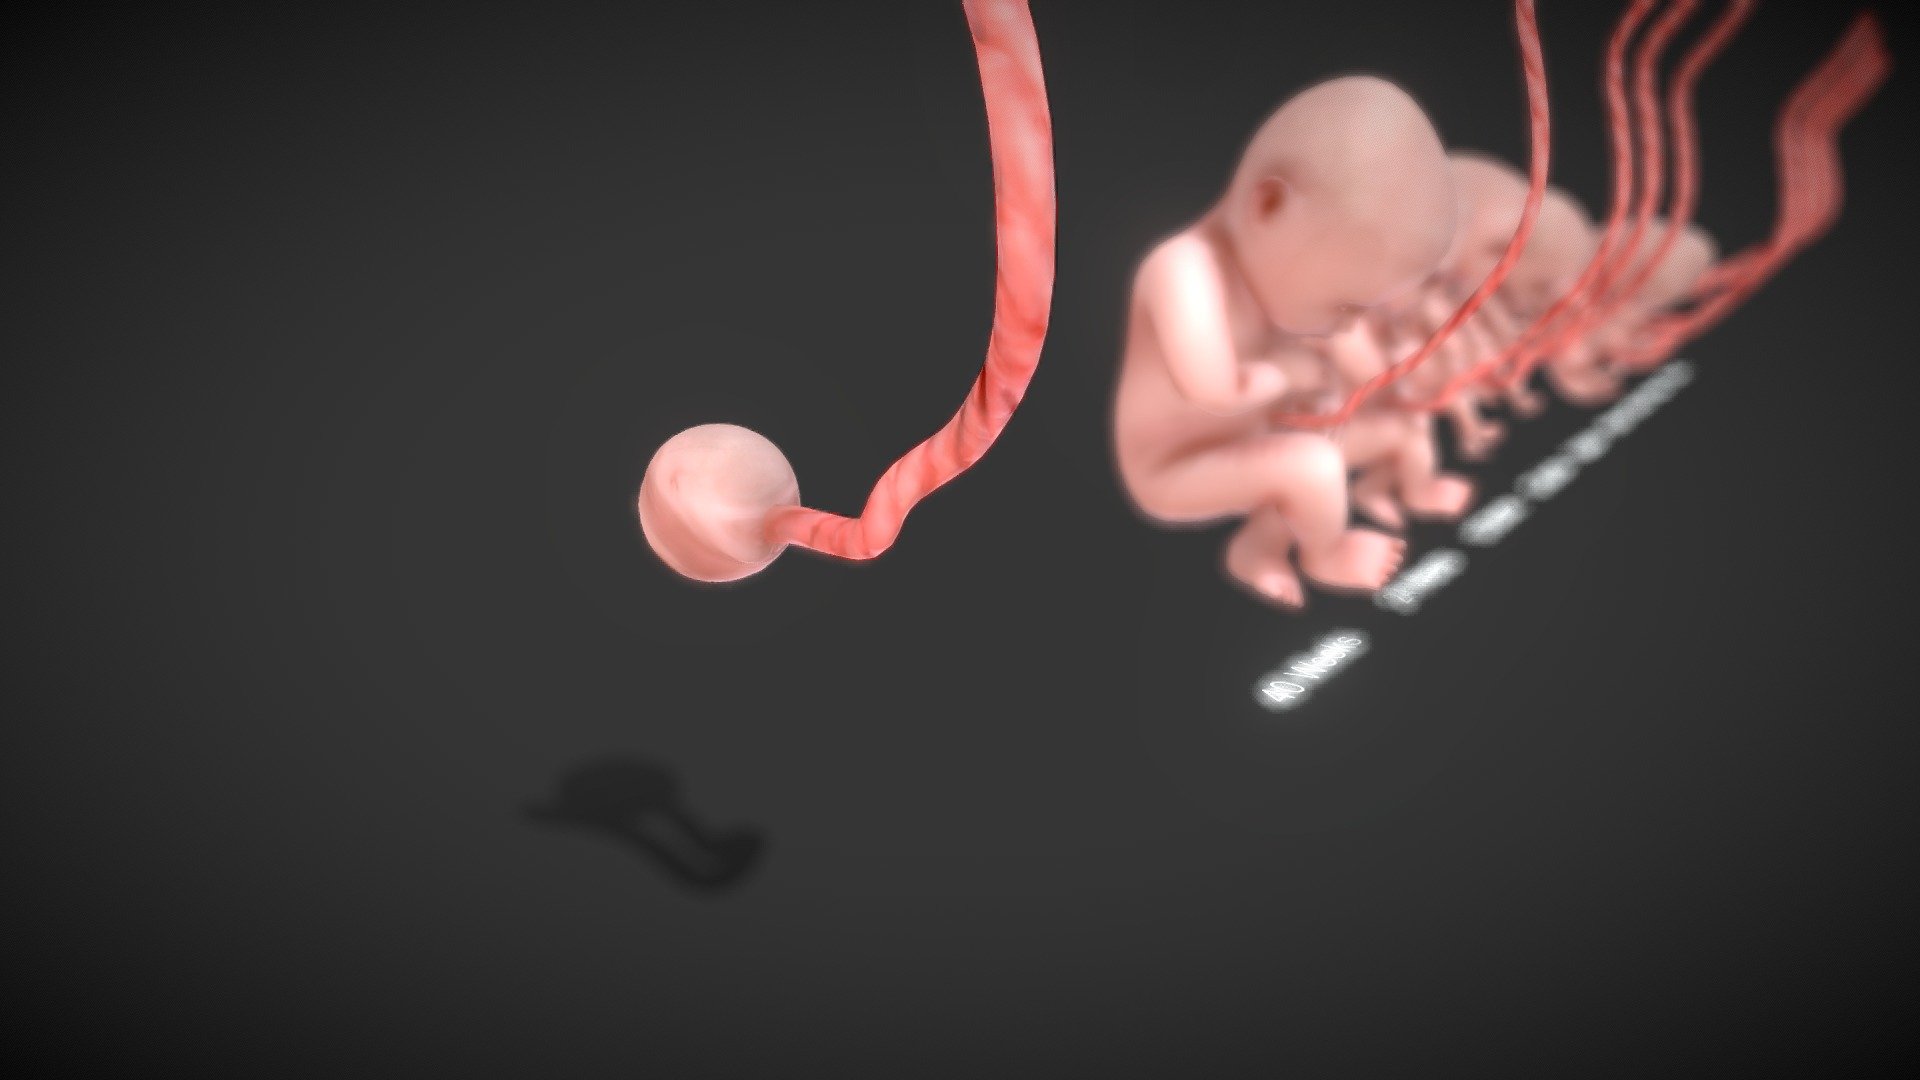 Animated/Morphed Human Fetus



No errors or missing files

High-quality polygonal model

No N-GONS Faces

This model is created in polygon quad &amp; tri with good edge flow

HDR Light Map is included if necessary .

The scene is well arranged

Objects, materials, and textures are named.

The model was animated and morphed

Poly Details:




Polys: 7277

Verts: 7250

Formats:




3Ds Max 2017 _V-Ray Animated/Rigged

3Ds Max 2014 _V-Ray Animated/Rigged

3Ds Max 2014 _Scanline Animated/Rigged

Maya 2016_V-Ray Animated

Maya 2016_Default Animated

FBX Animated

FBX (9 seasons) Static

OBJ

3Ds

Textures:
* Name Size Format QTY
* Fetus 8192 PNG/EXR 5

{Diffuse- Normal- Specular- AO – Displacement} - 3D Animated Human Fetus - Buy Royalty Free 3D model by 3D4SCI 3d model